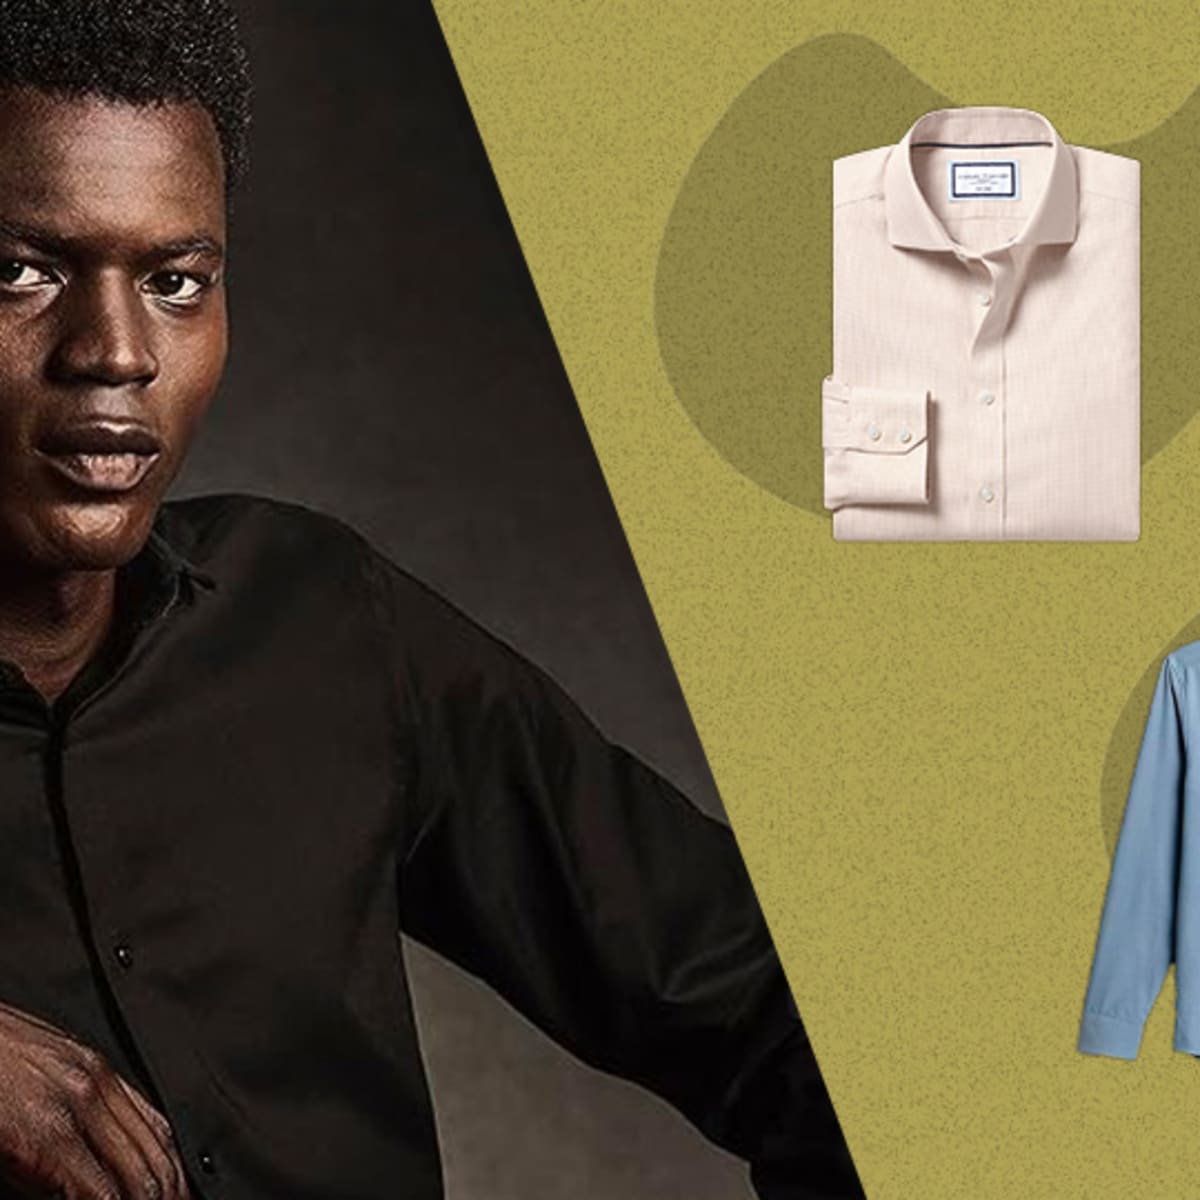 How an Untucked Shirt Should Fit: Guide to Button-Ups, T-Shirts, & Polos